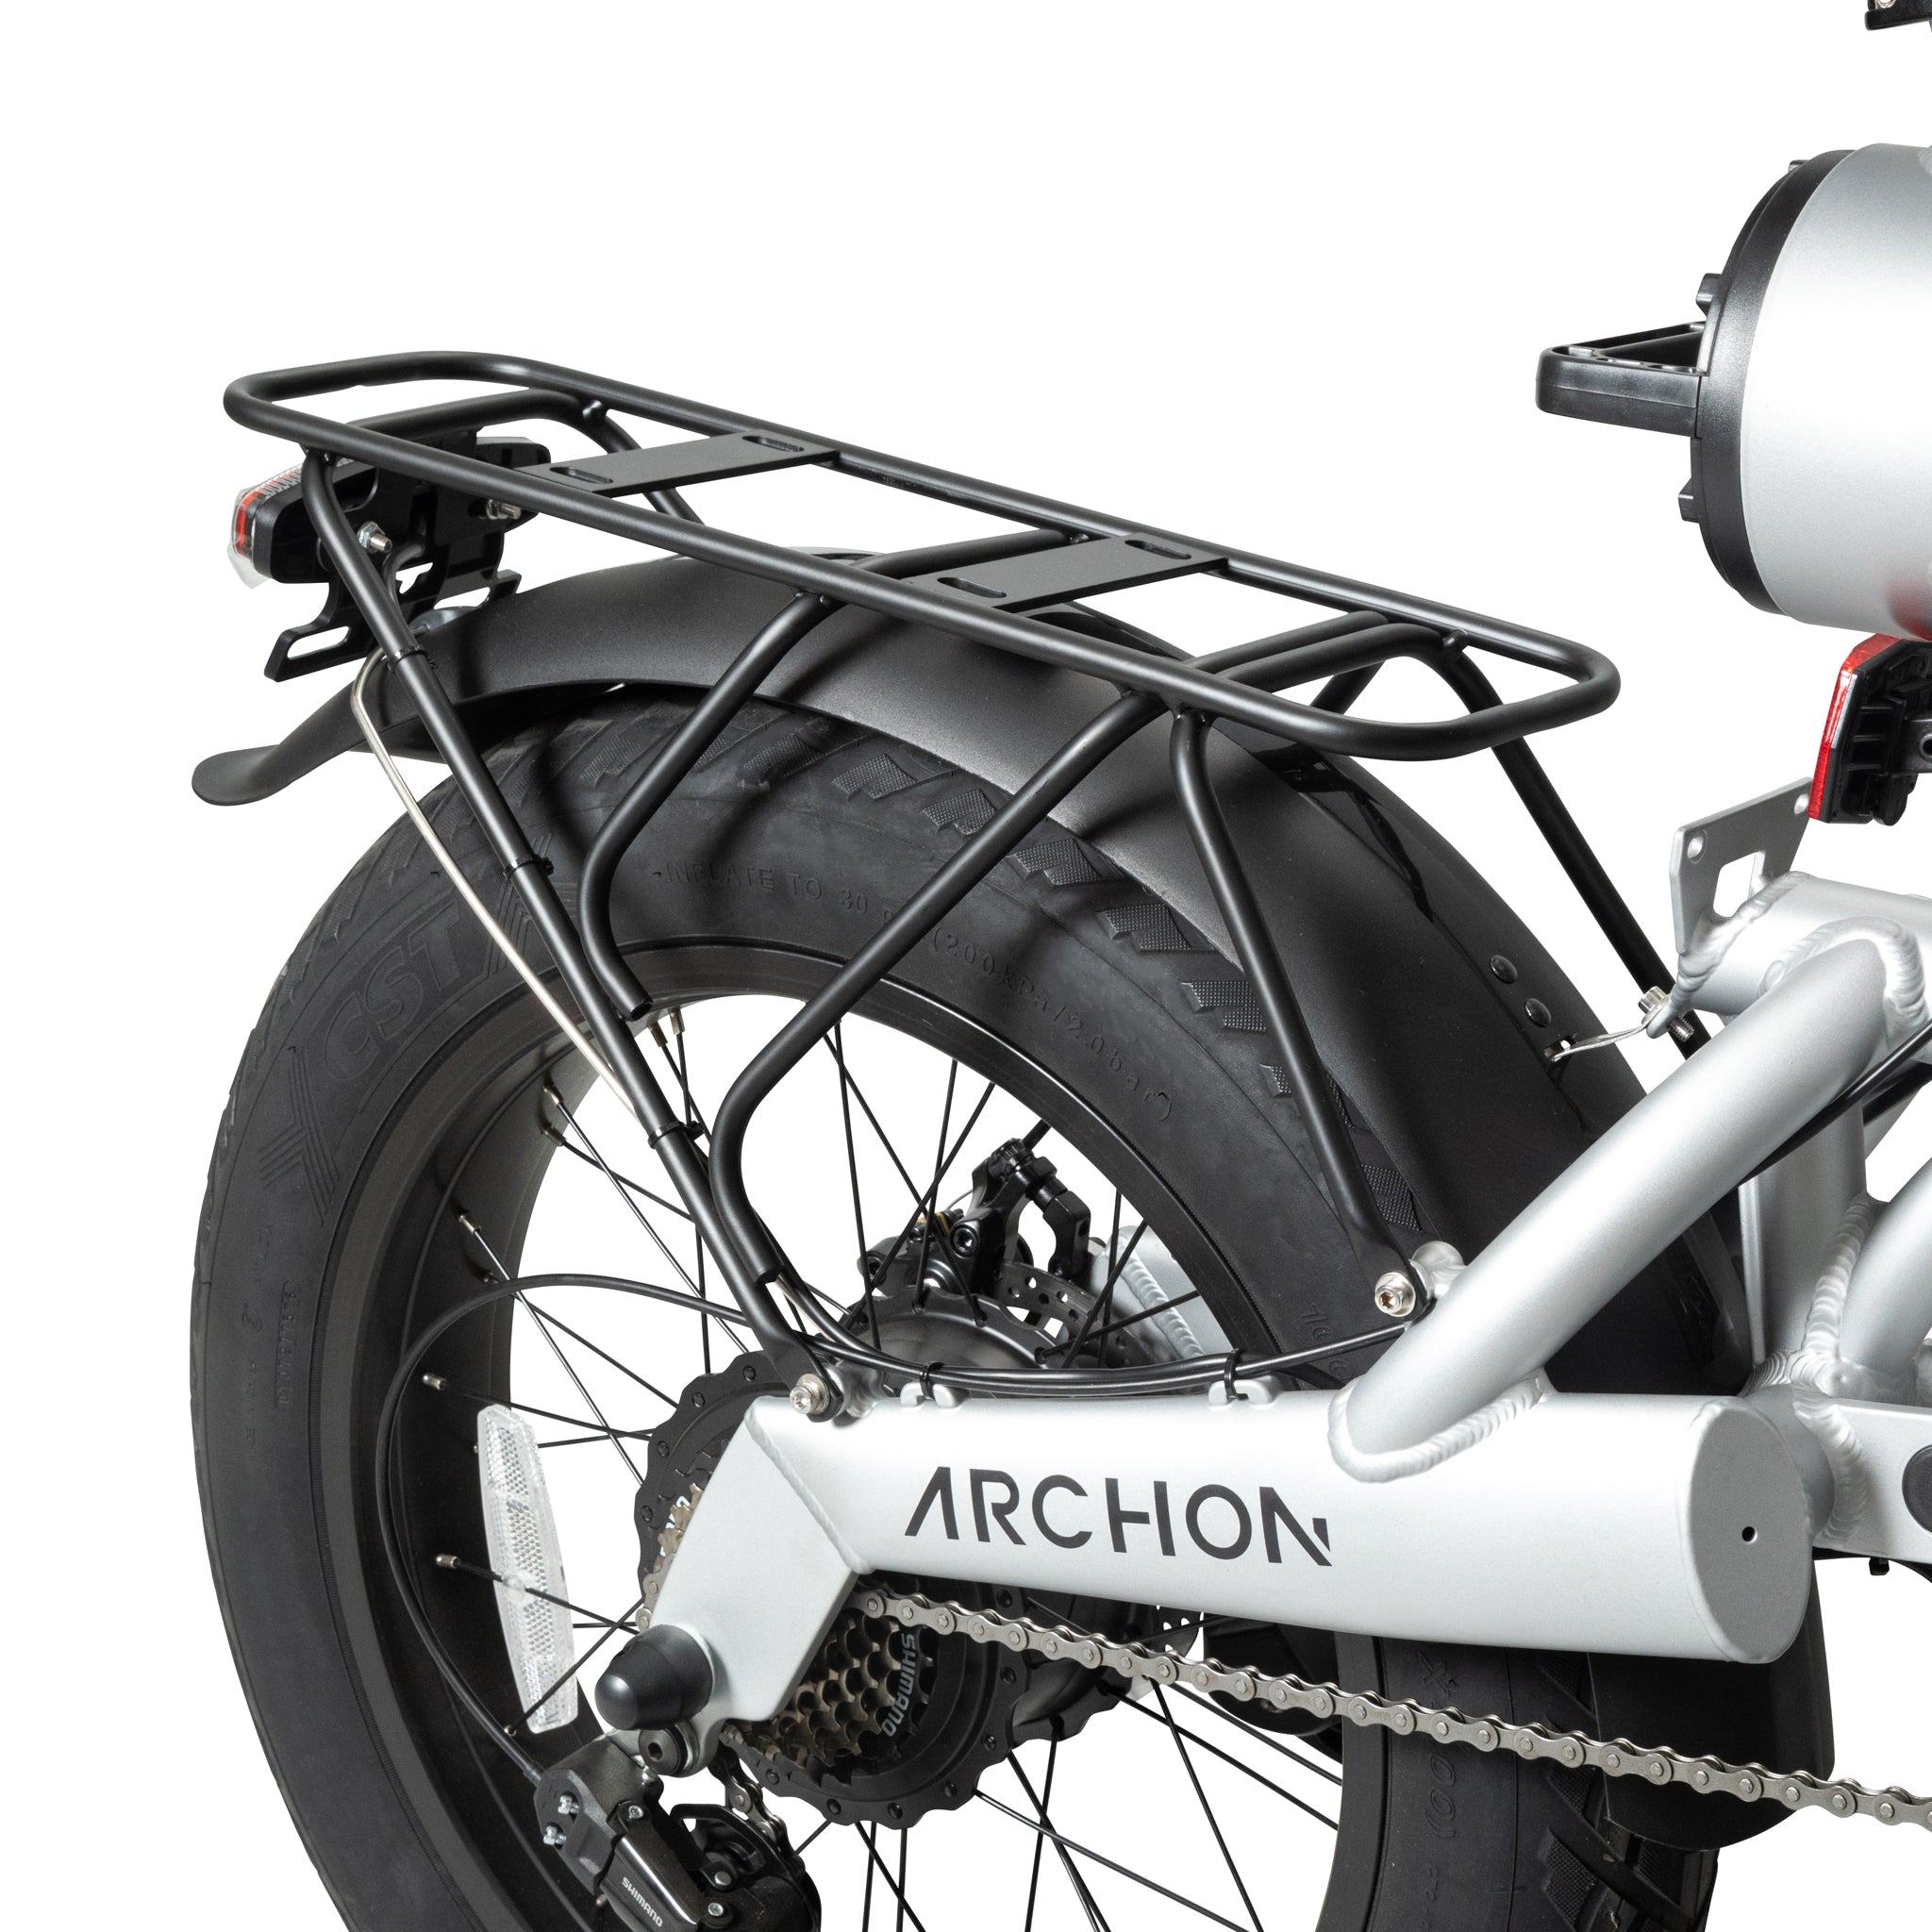 ARCHON DESIGN A02 Rear Carrier – 電動アシスト自転車・バッグ通販の 